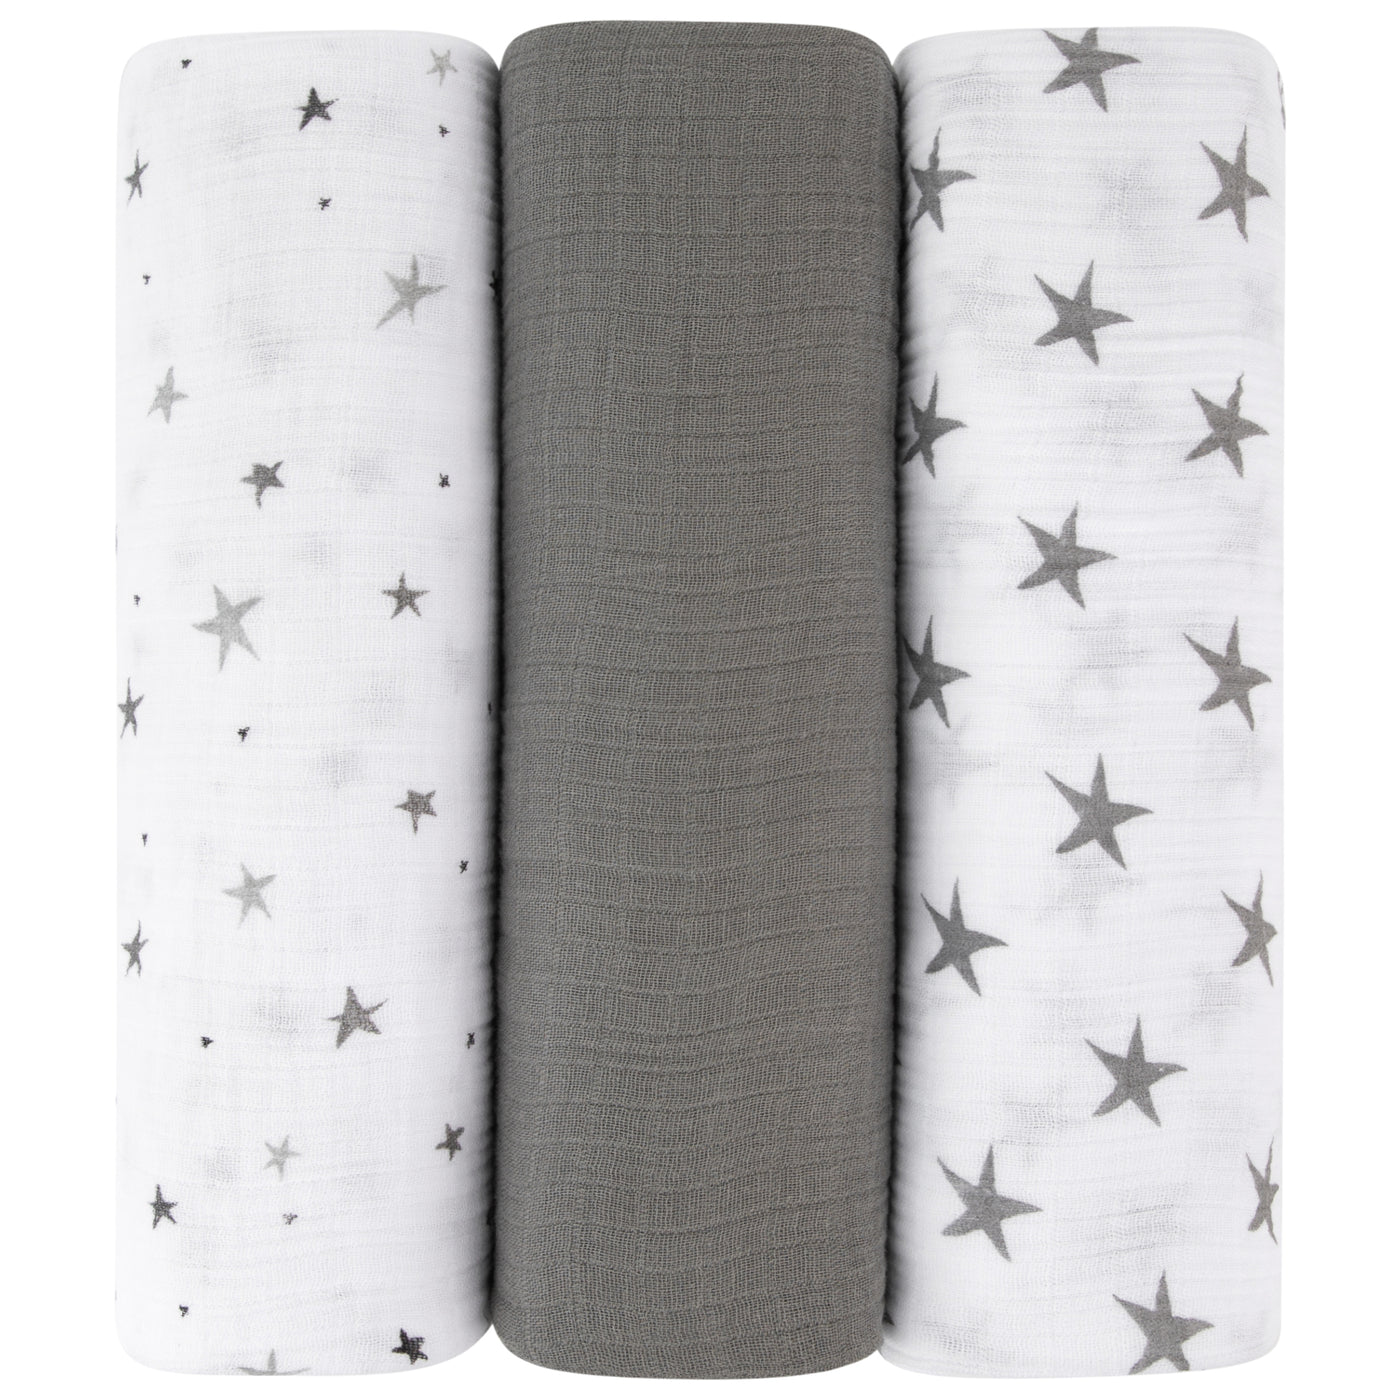 Ely's & Co. Muslin Swaddle Three Pack - Gray Star Collection